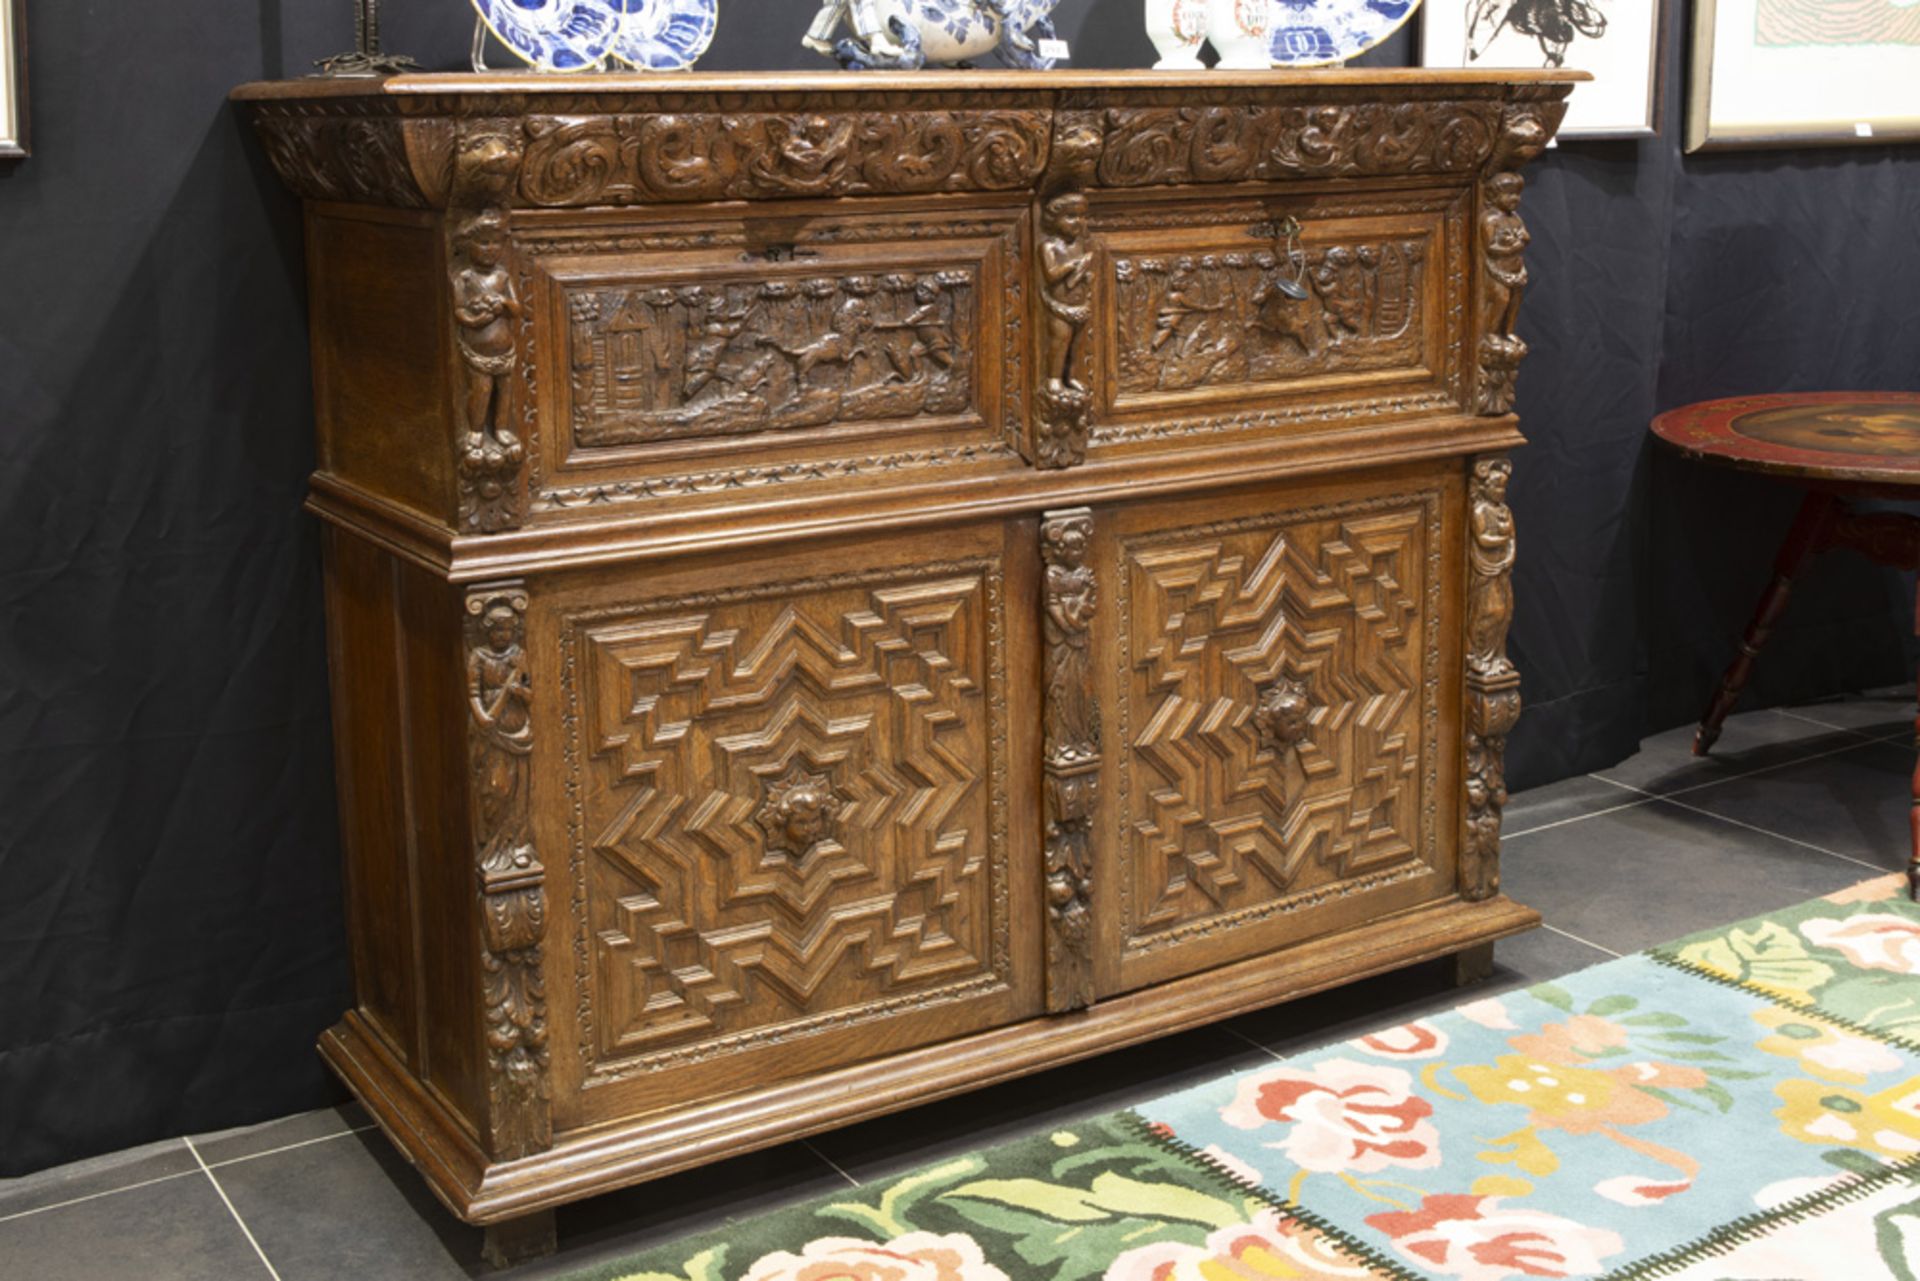 17th Cent. Flemish baroque style cupboard in oak with typical, sculpted ornamentation with